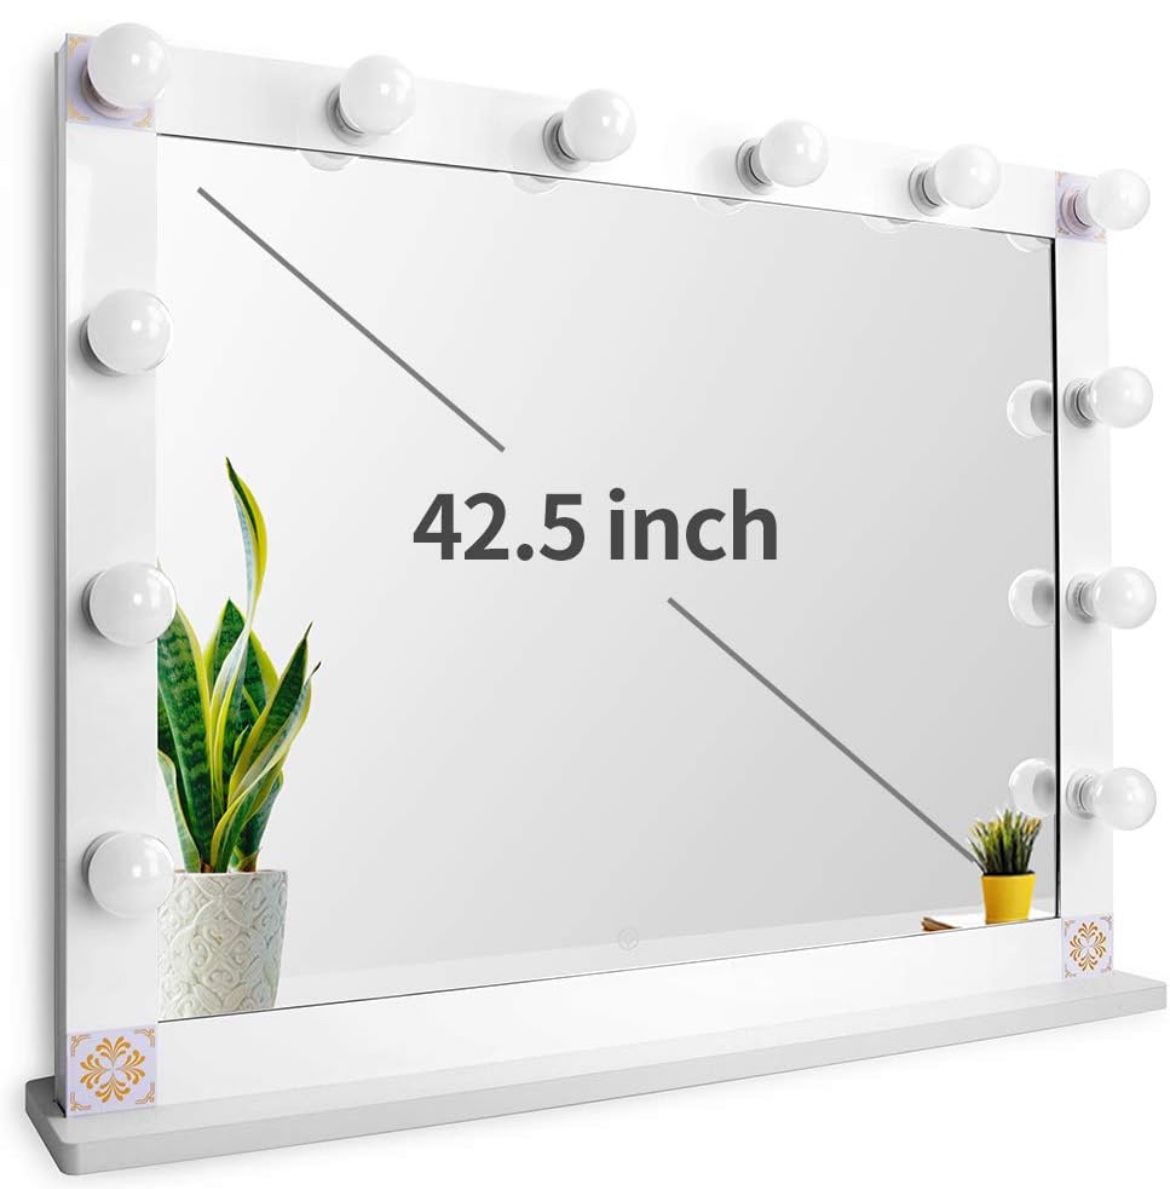 Hollywood Style Lighted Vanity Mirror, Tabletop Makeup Mirror with Dimmer Lights, White